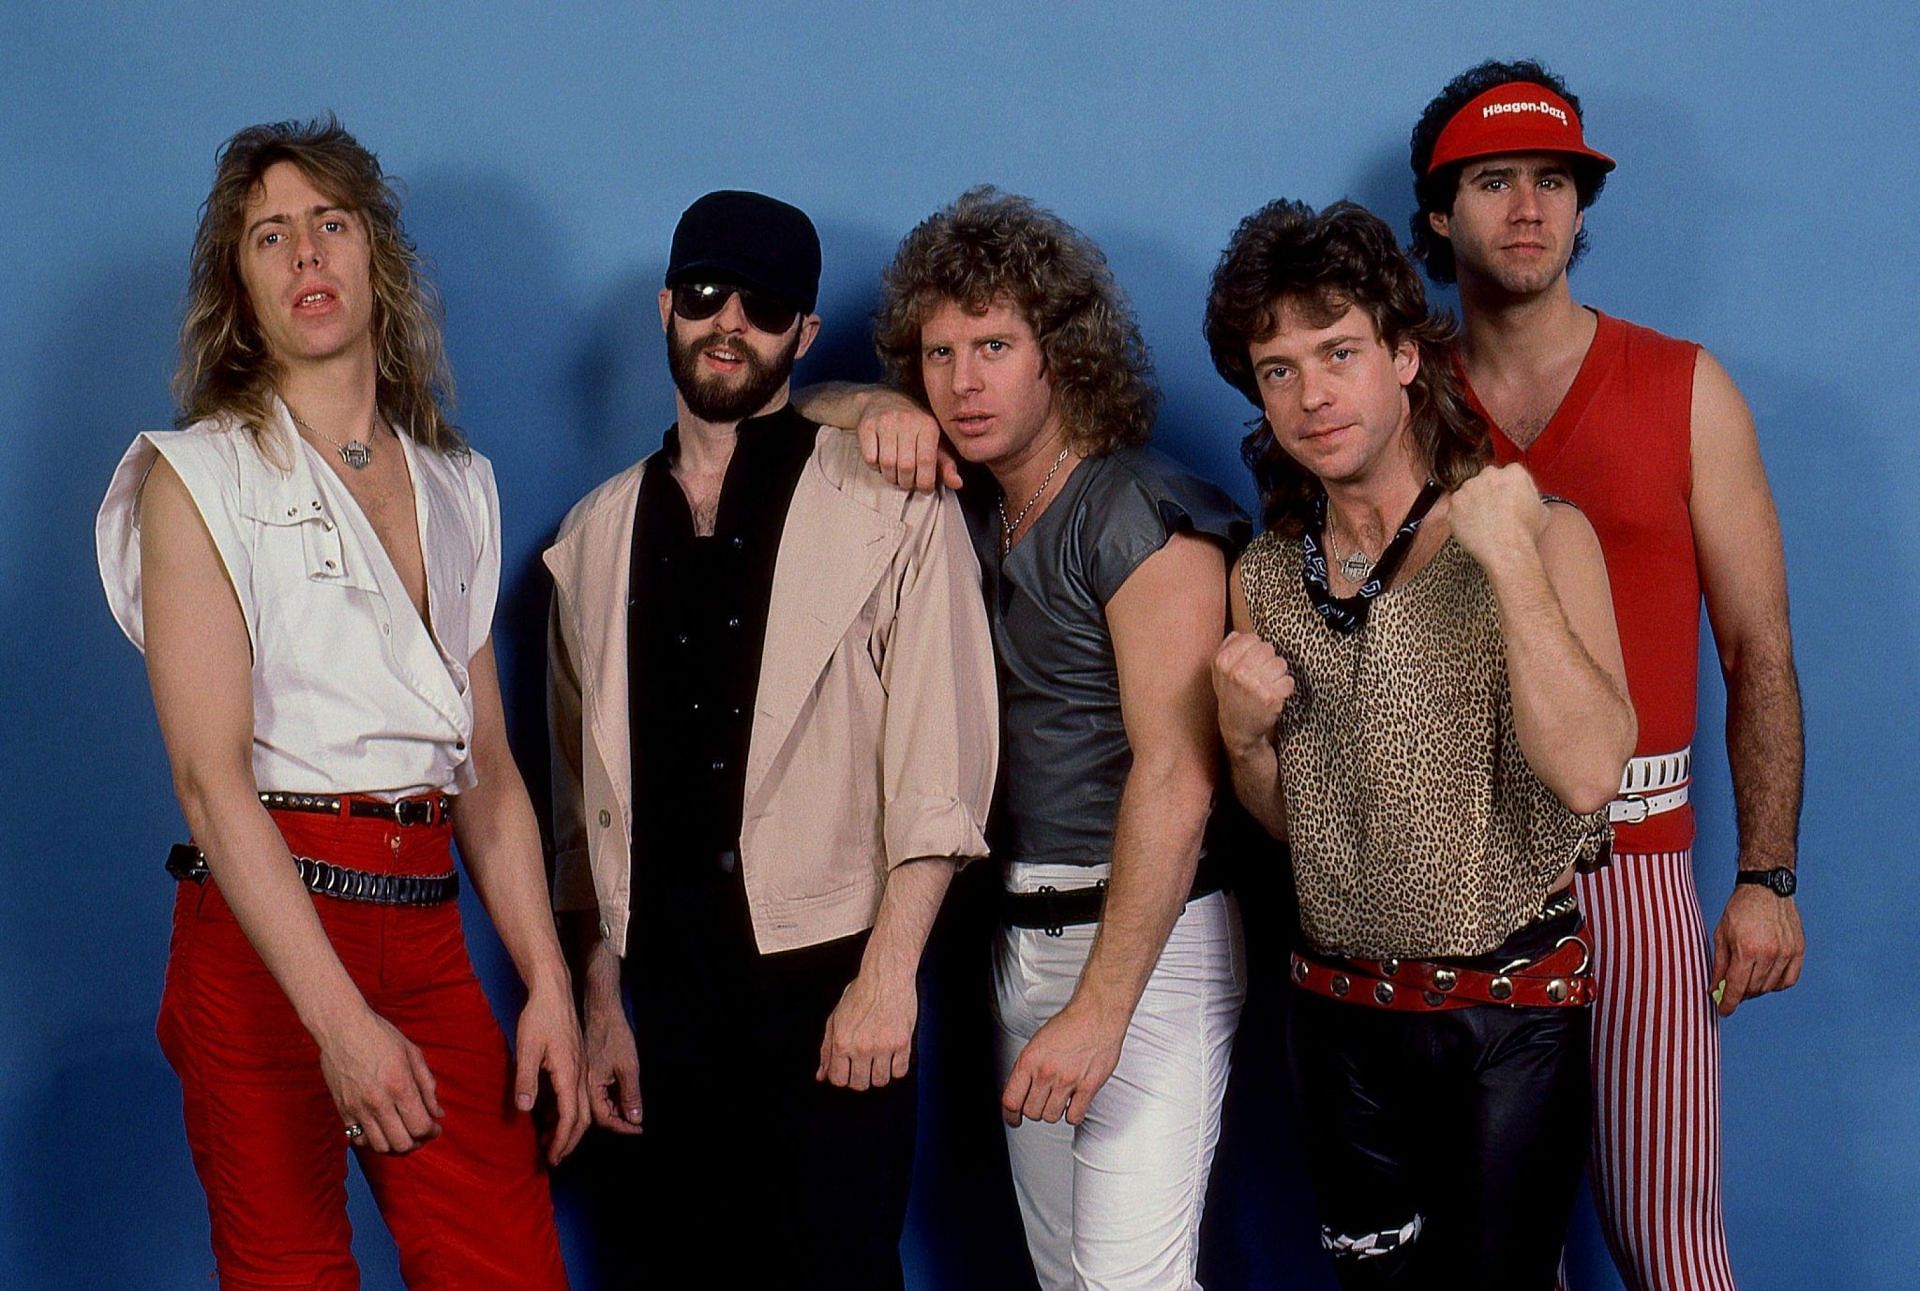 who did night ranger tour with in 1985